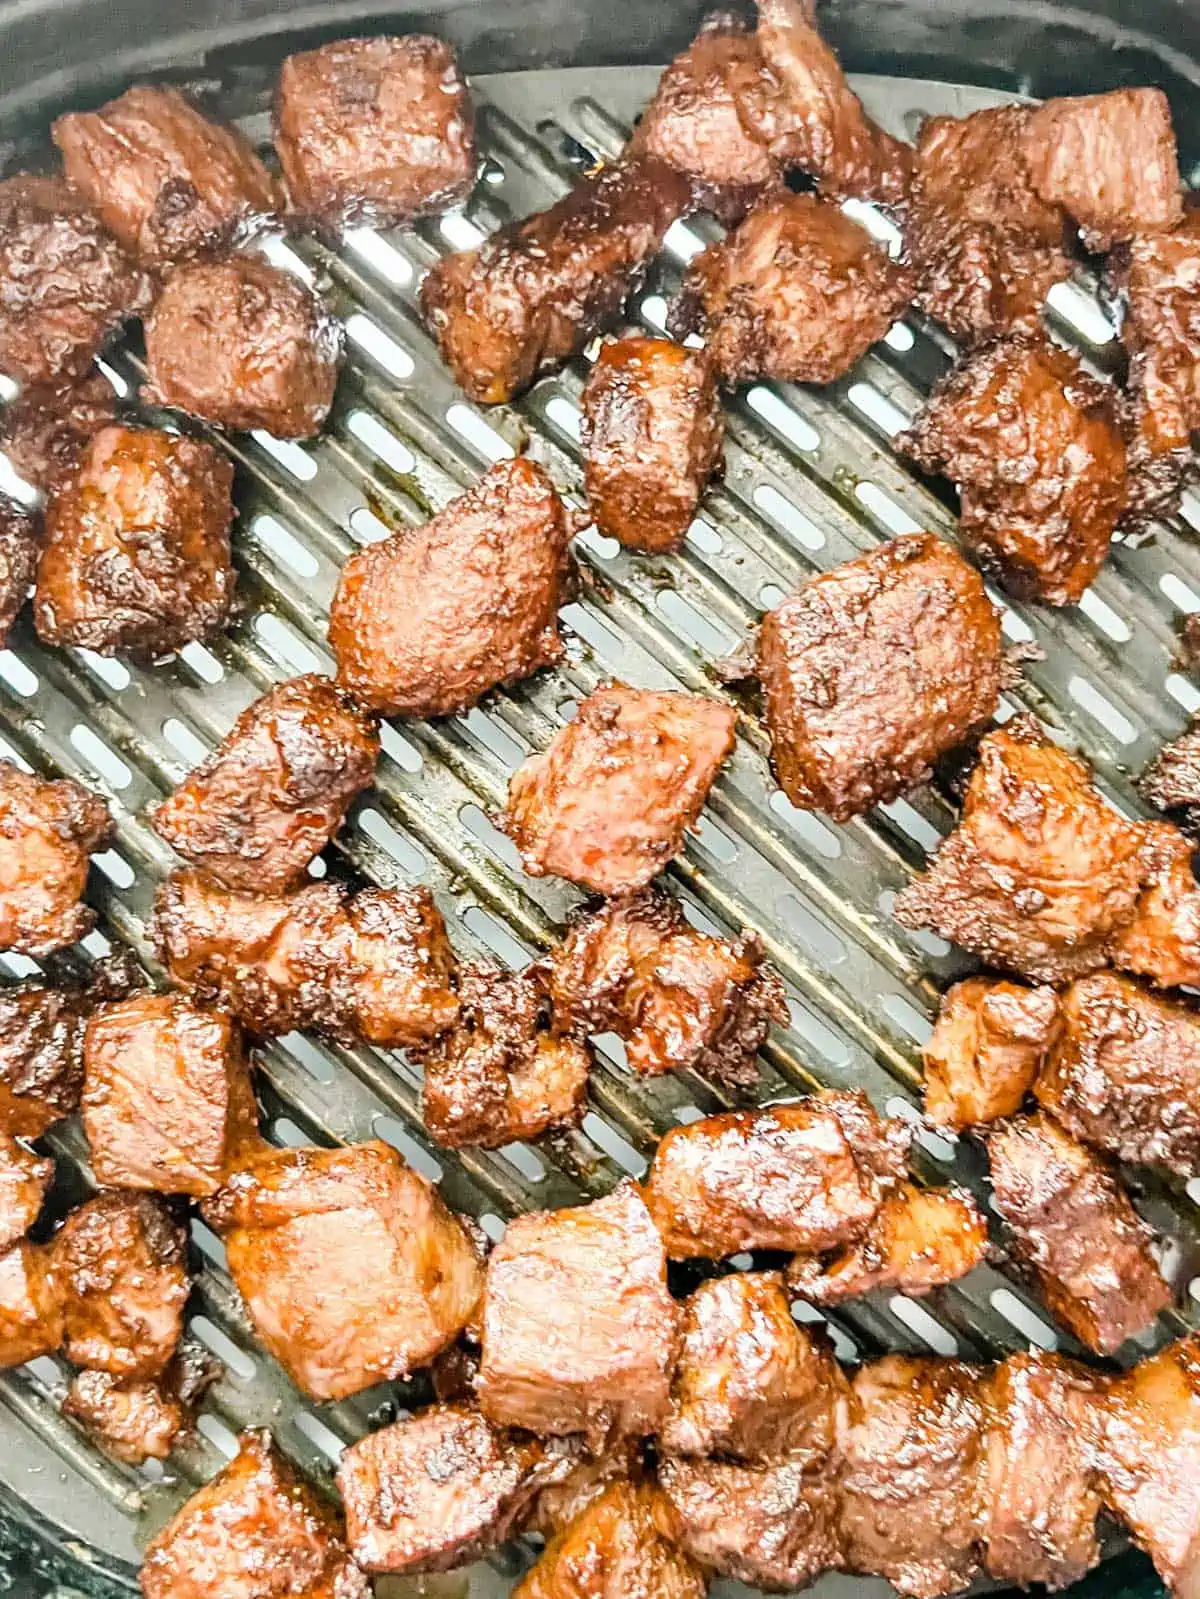 Photo of steak bites being cooked in a air fryer.